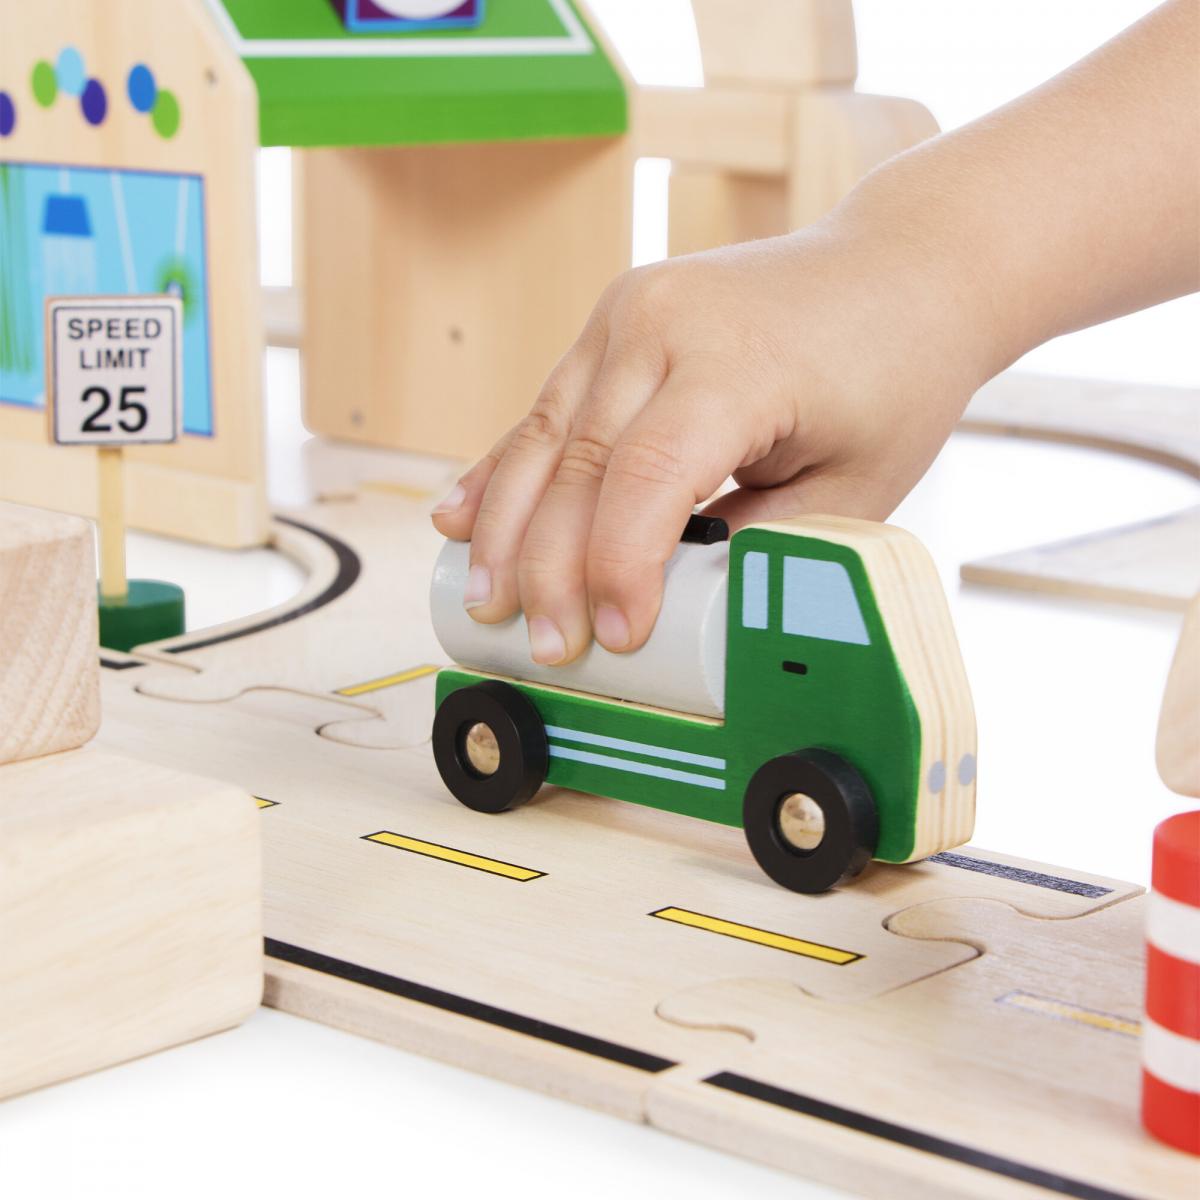 Guidecraft Wooden Truck Collection Set of 12 Wooden Truck Collection Set of 12